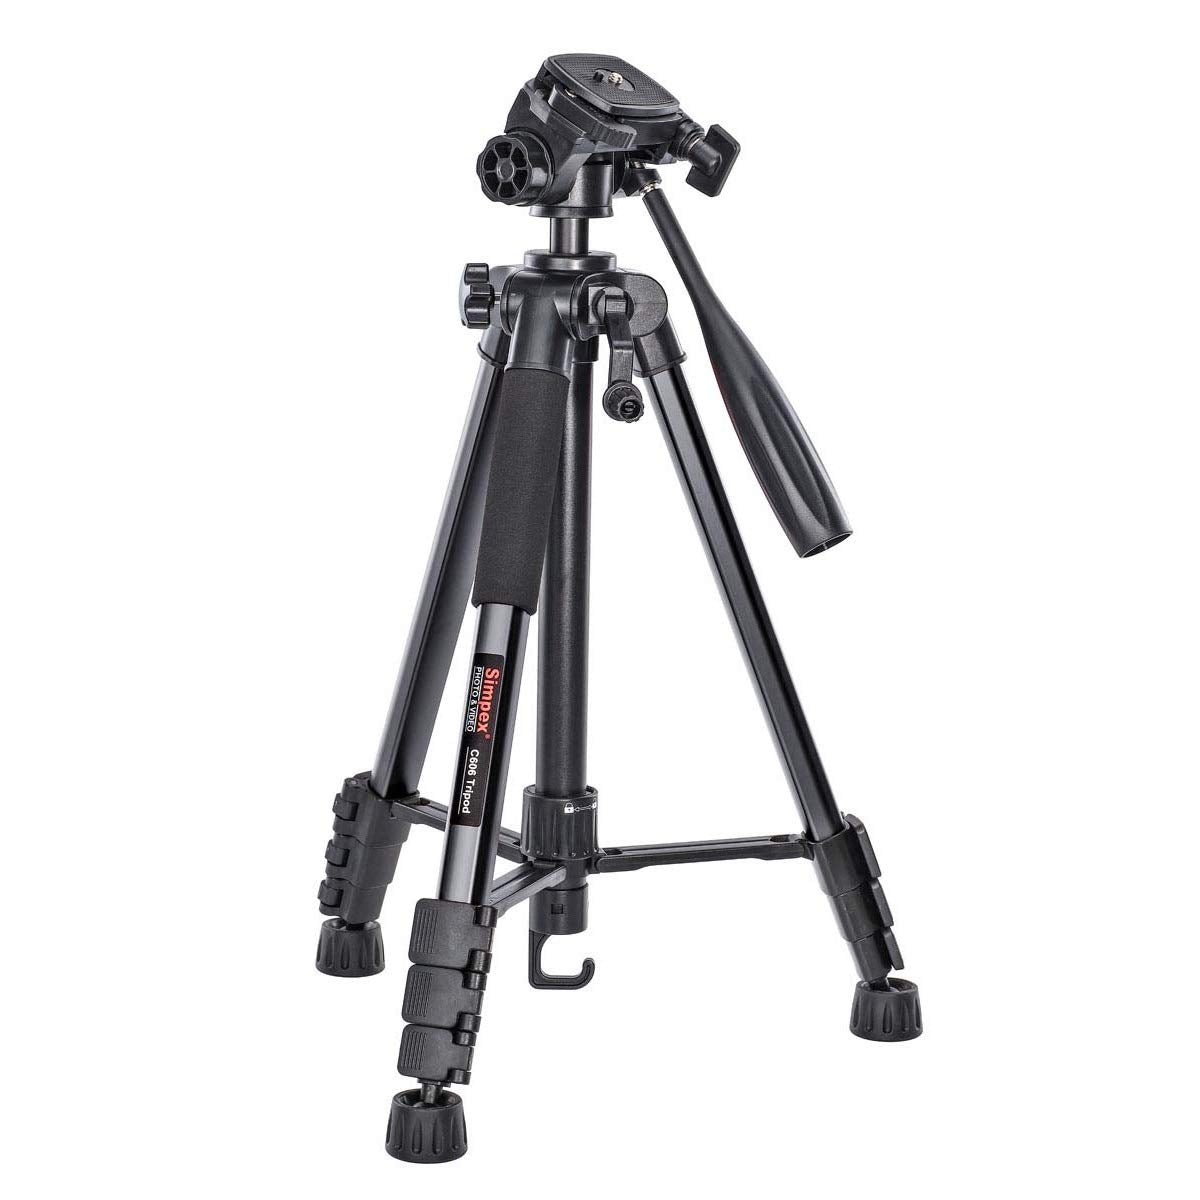 Simpex Tripod C-606 - Professional Tripod with Carry Bag (Black) (Pack of 2)